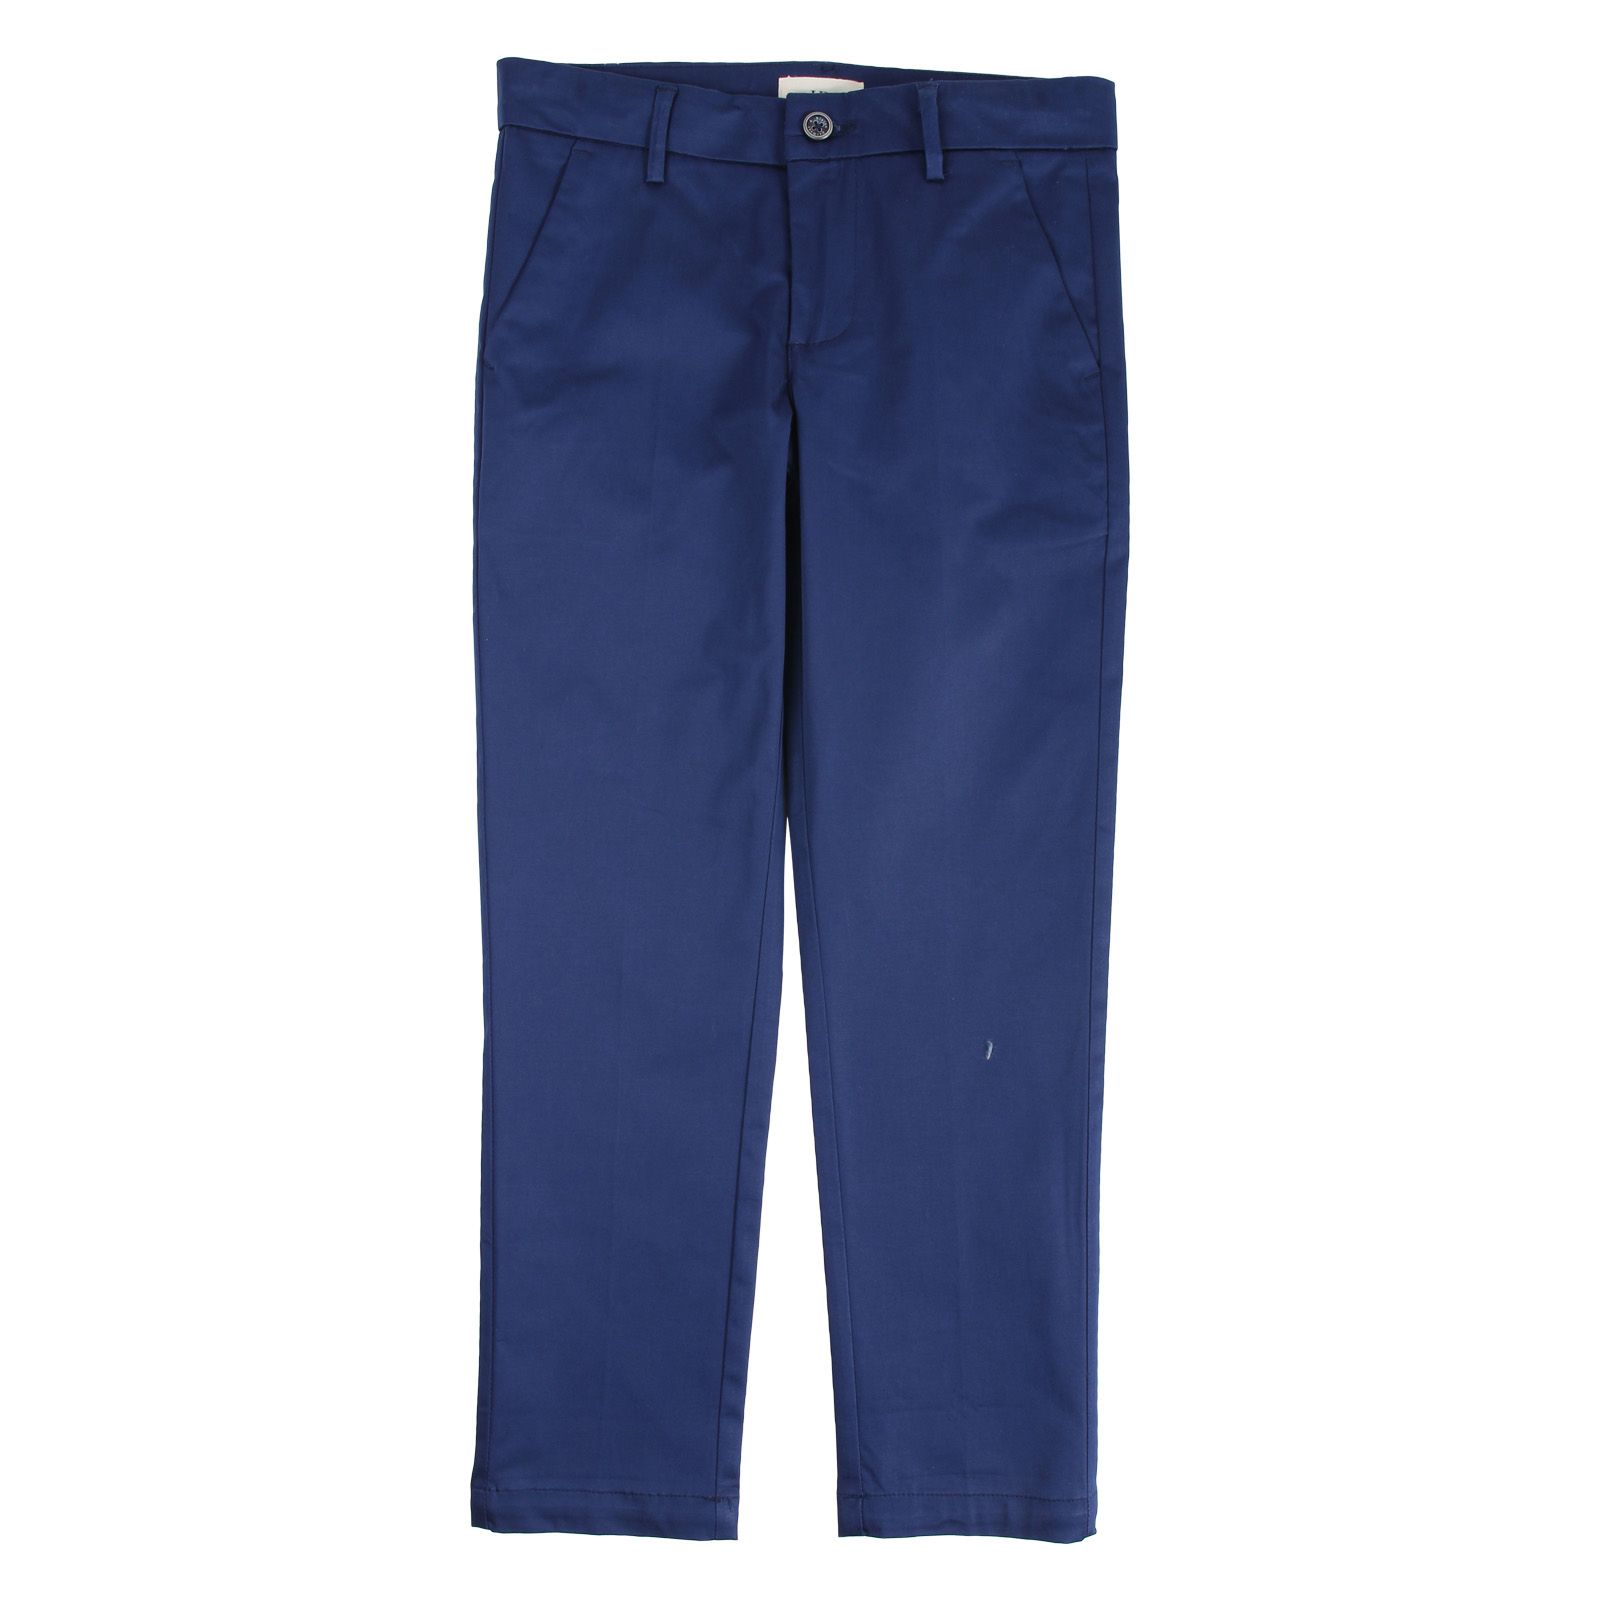 Harmont & Blaine blue prussian trousers -Details basic trousers, completely blue, 4 pockets, back with visible logo, central closure -Washing max 30 °